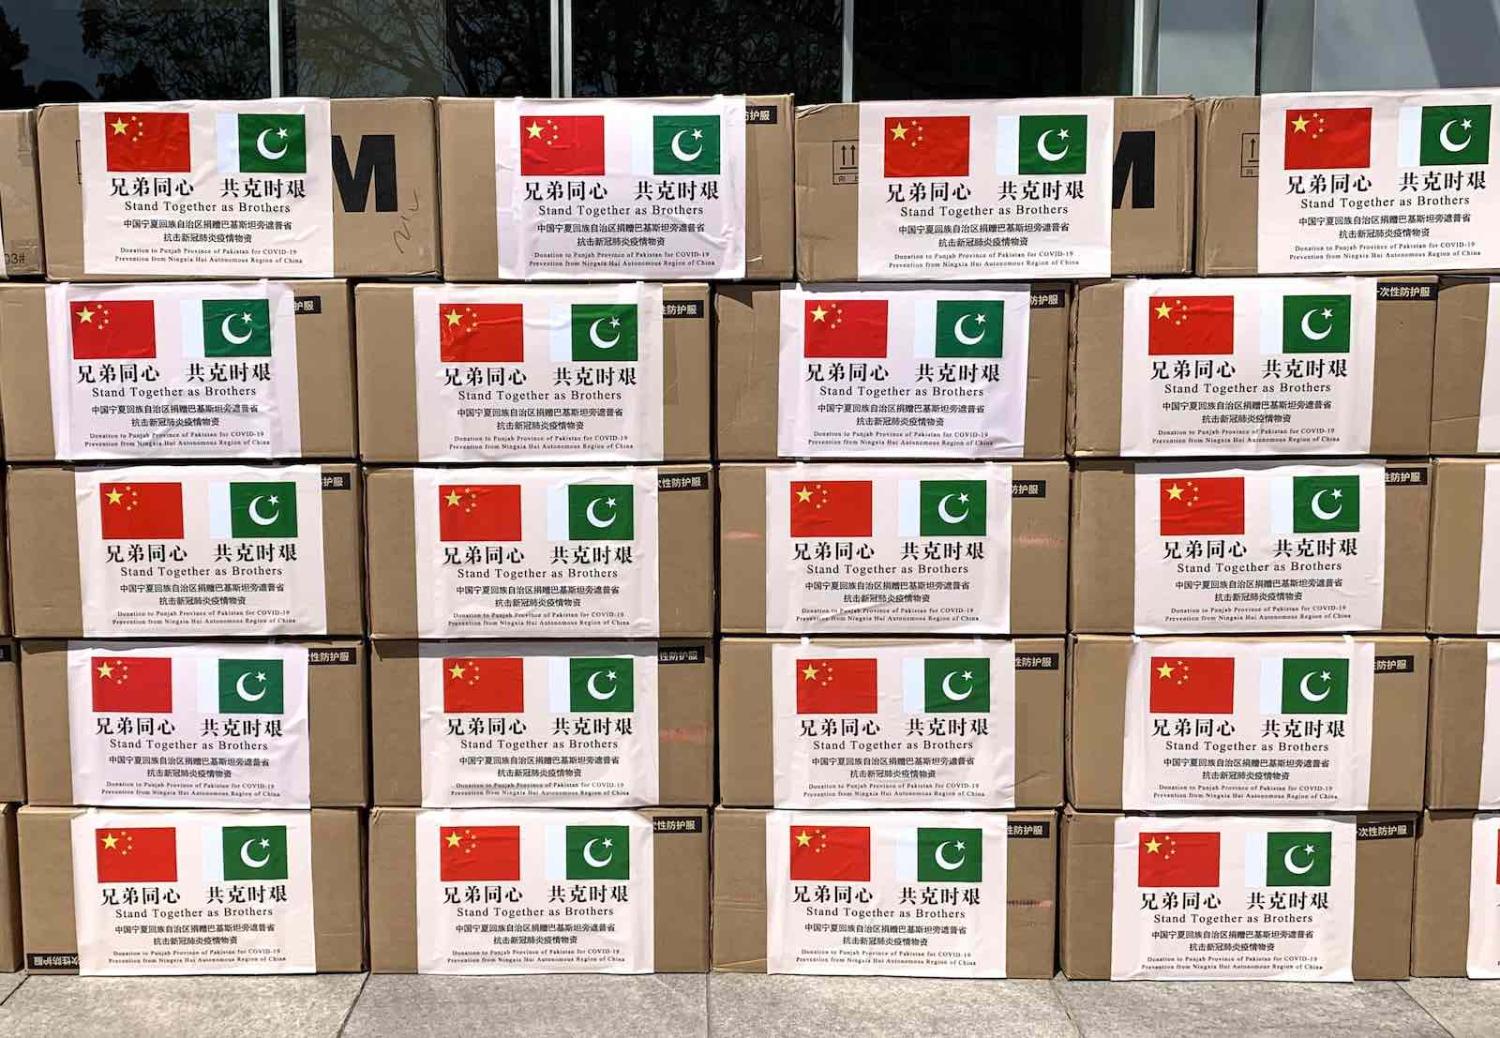 Boxes of medical supplies to be donated to Pakistan for anti-epidemic work, 24 April 2020 in Yinchuan, Ningxia Hui Autonomous Region of China (Li Peishan/China News Service via Getty Images)